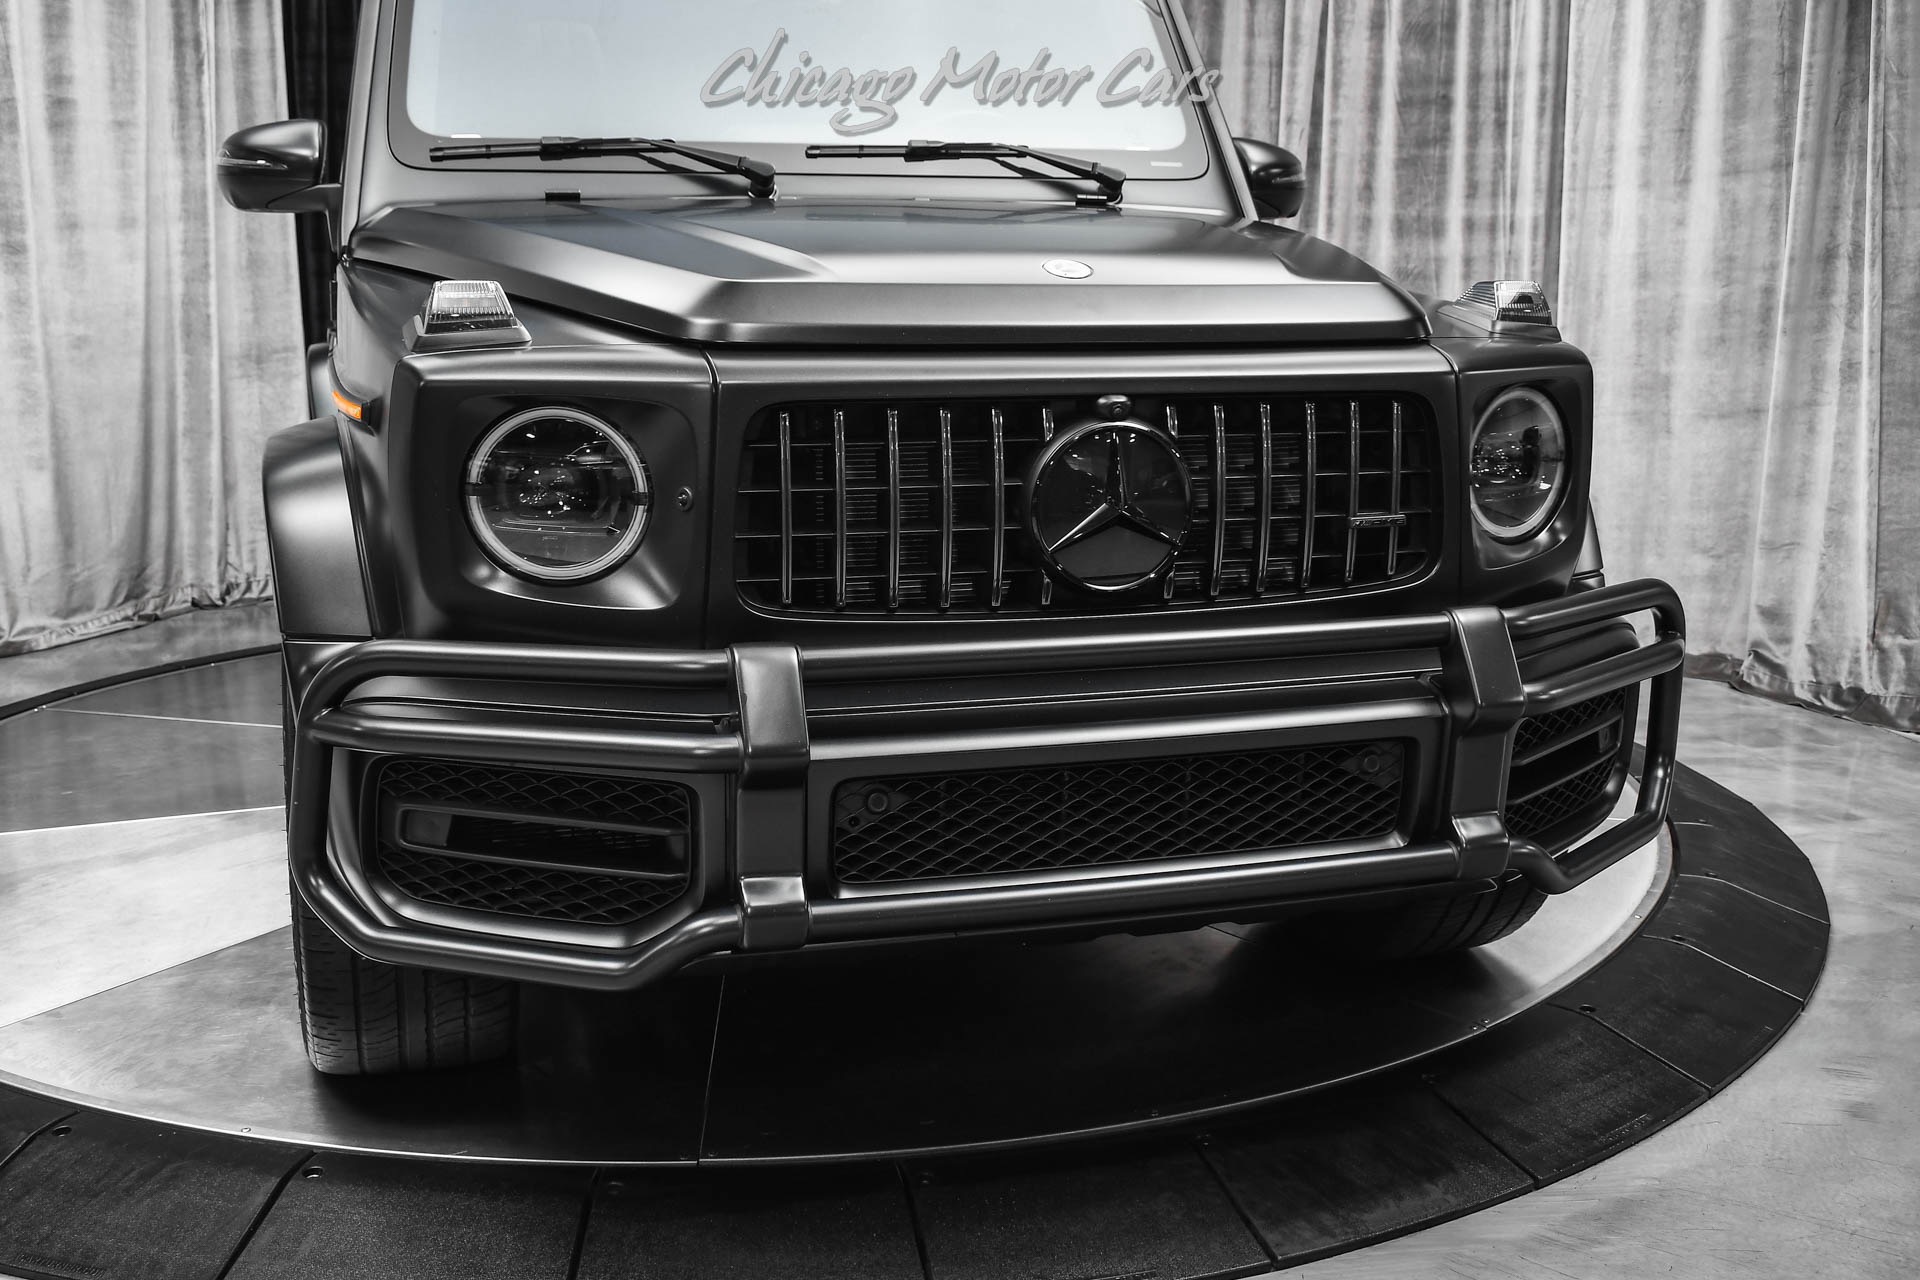 Used-2021-Mercedes-Benz-G63-AMG-4Matic-SUV-LOW-Miles-Exclusive-Interior-Pkg-Night-Pkg-Magno-LOADED